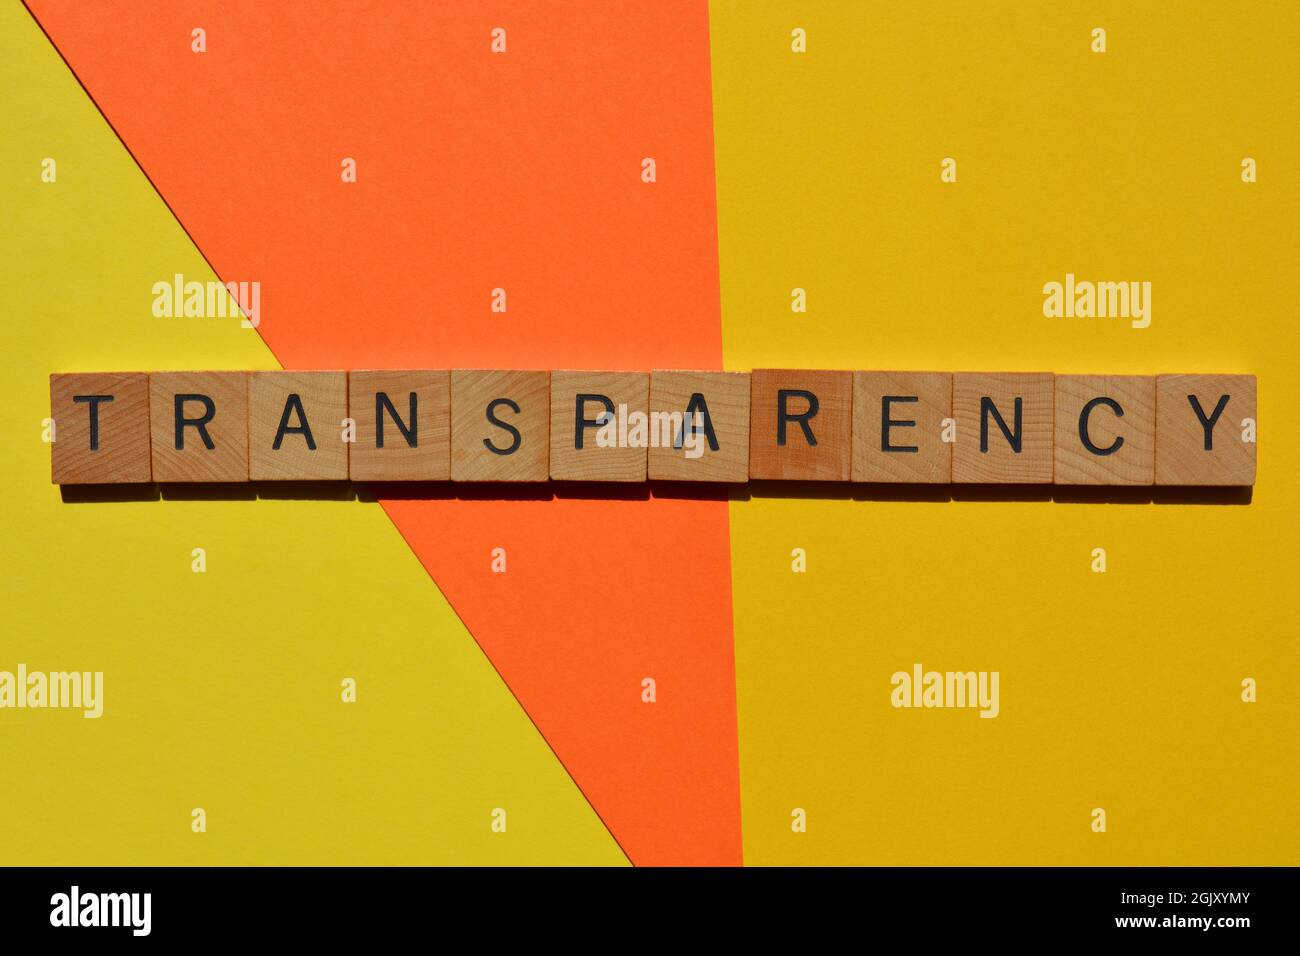 Transparency, word in wooden alphabet letters isolated on brightly coloured background Stock Photo